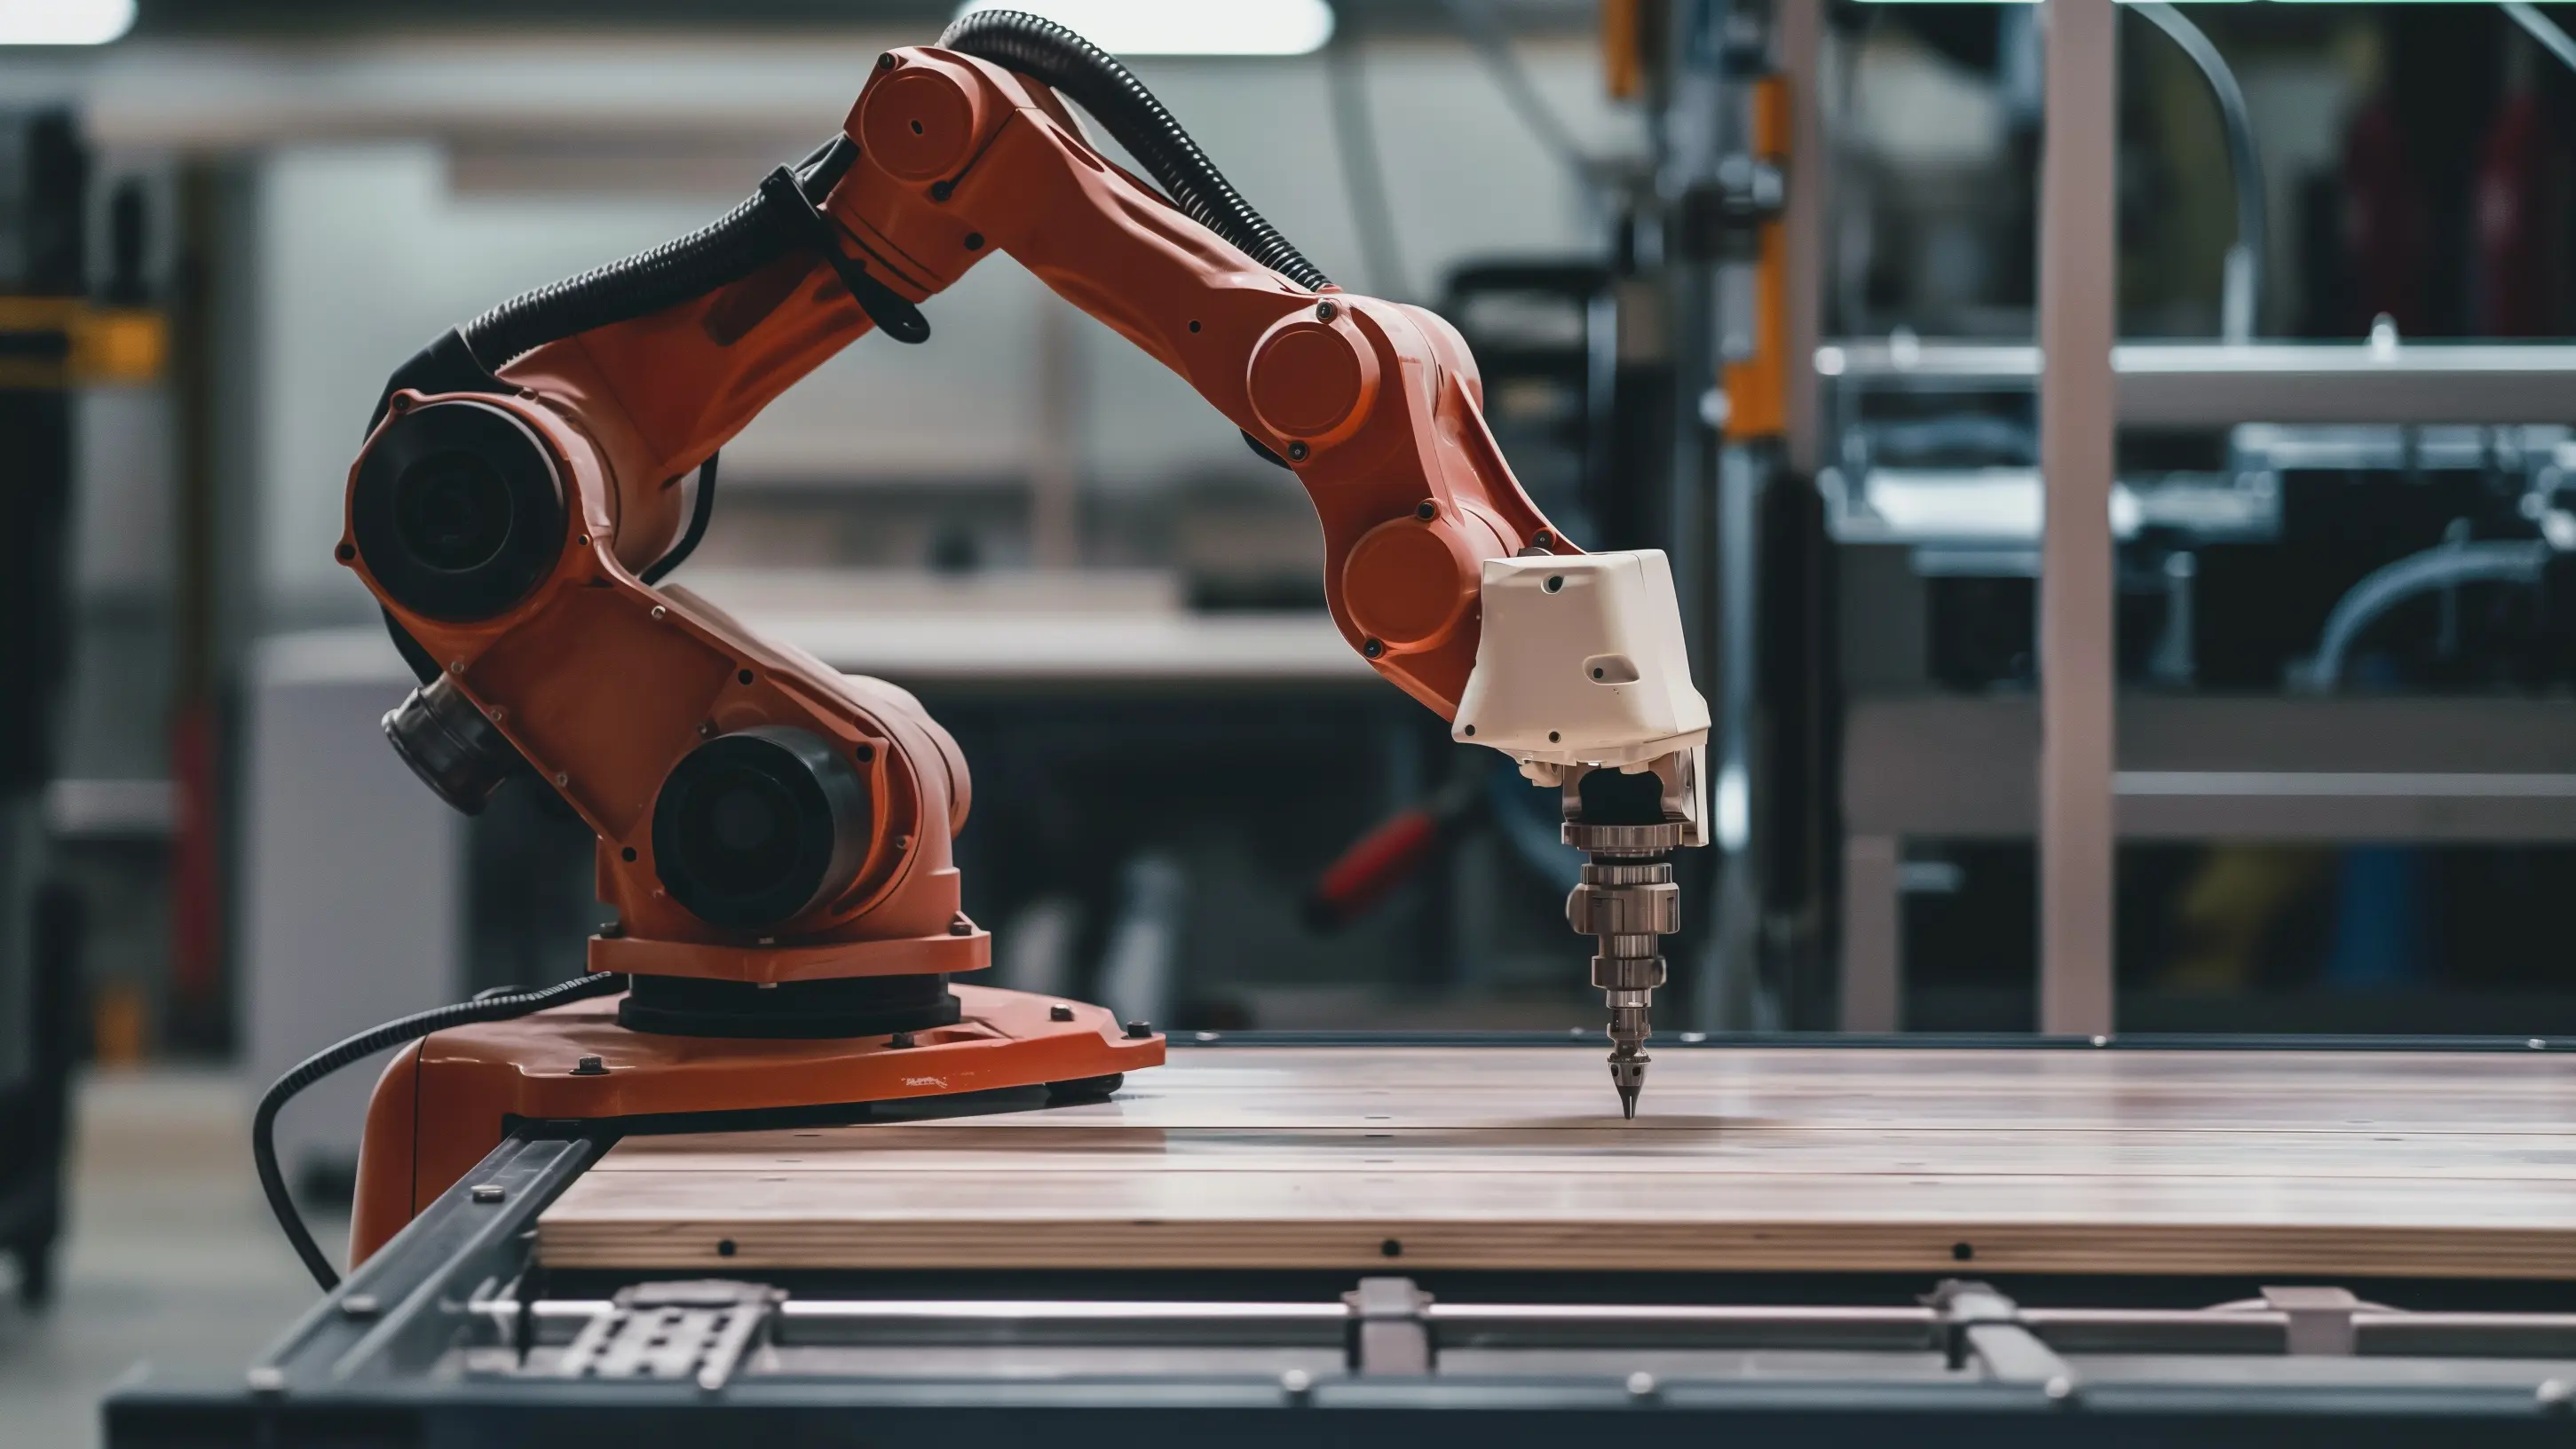 Will AI Fully Replace Humans in Manufacturing?